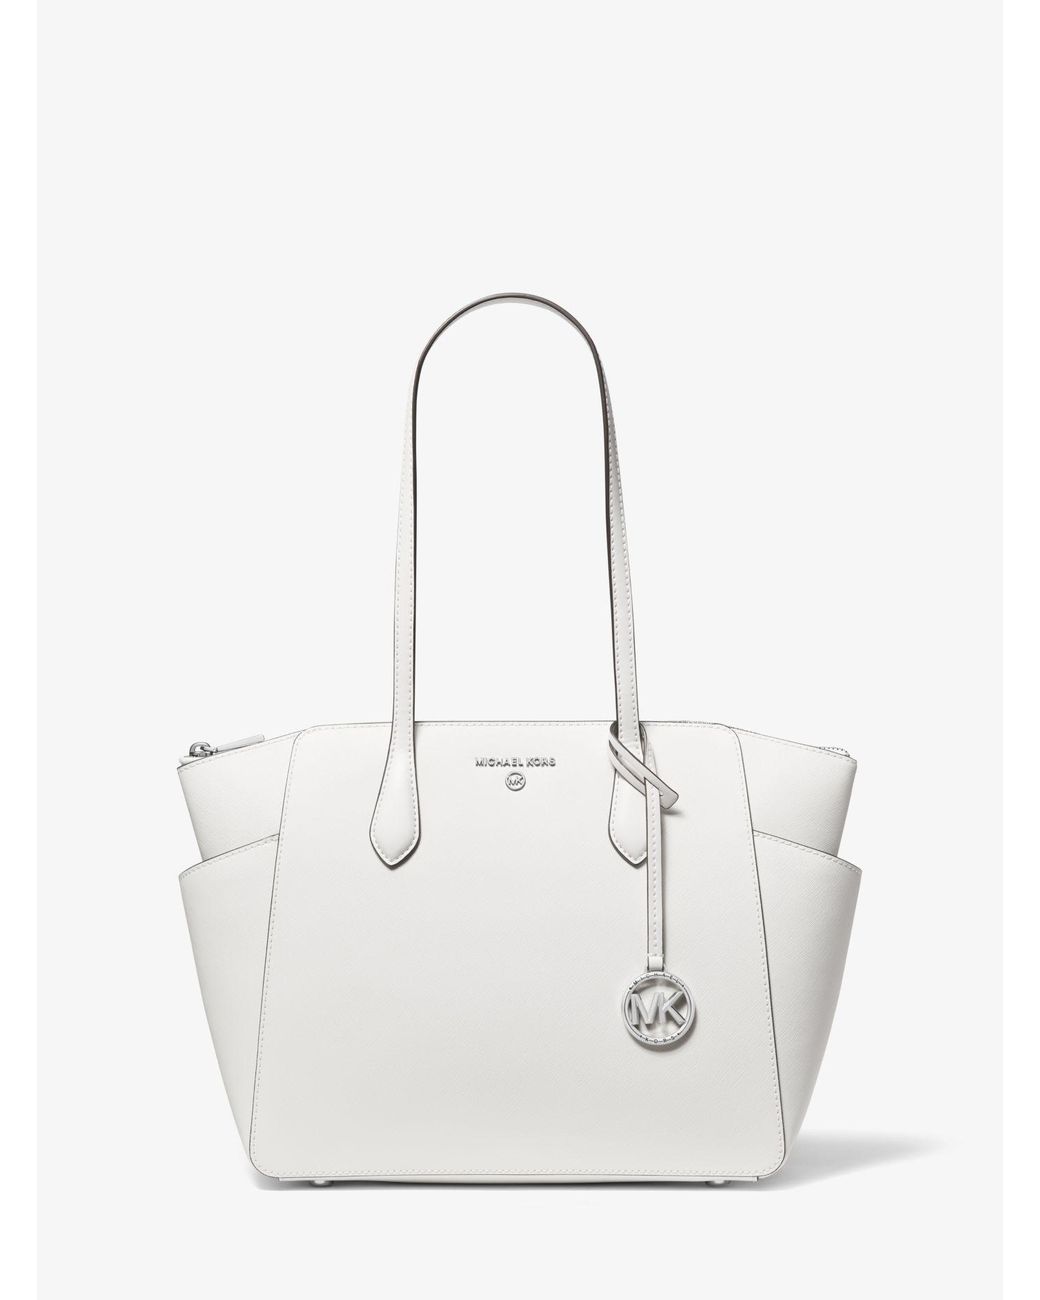 Michael Kors Marilyn Medium Saffiano Leather Tote Bag in White | Lyst